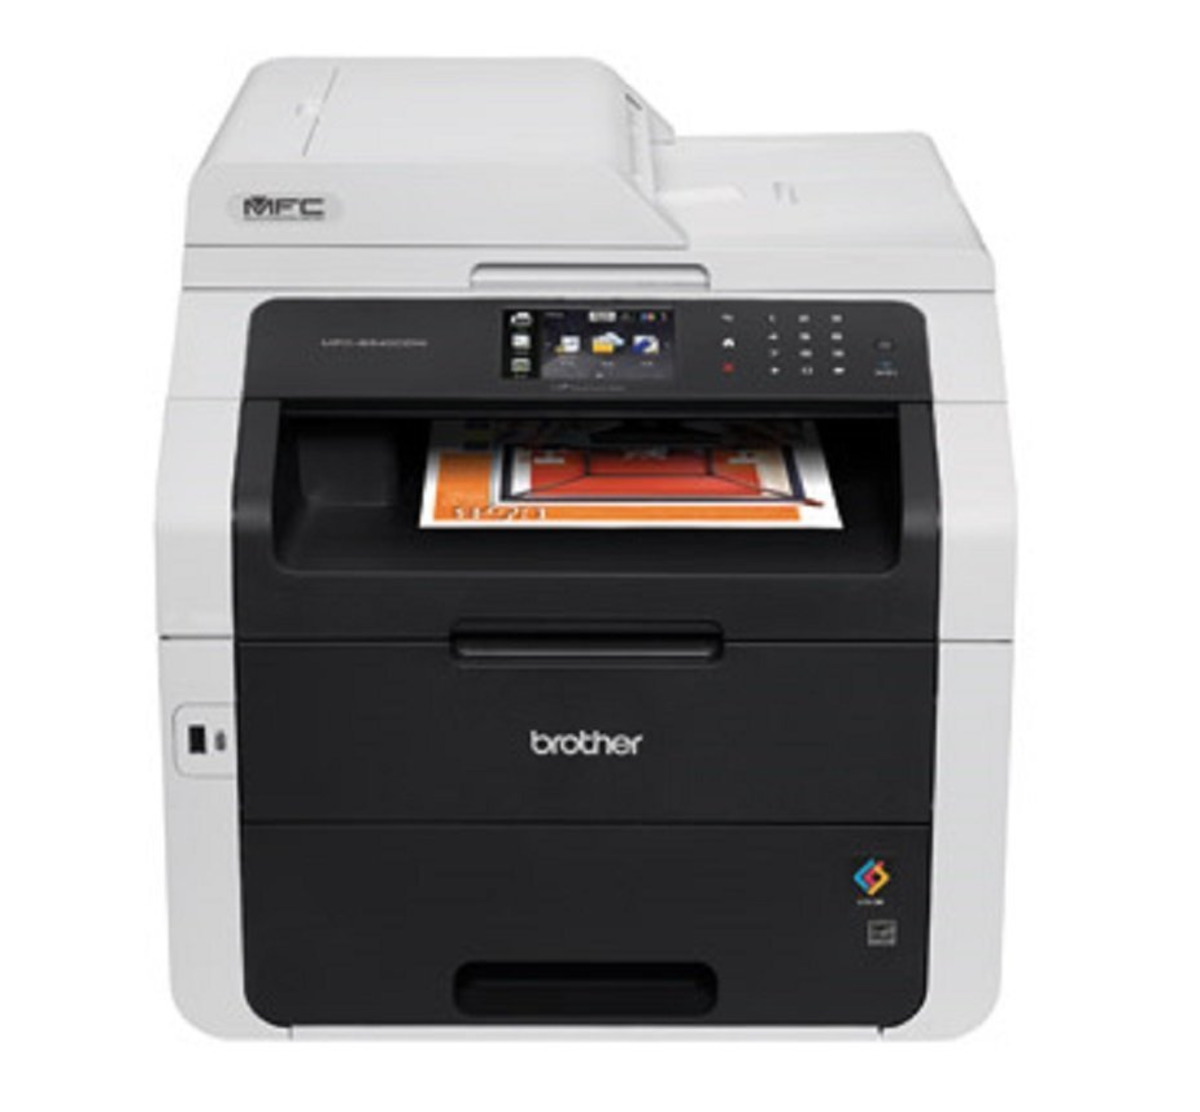 Brother all in one wireless color printer (model no. MFC9340CDW)